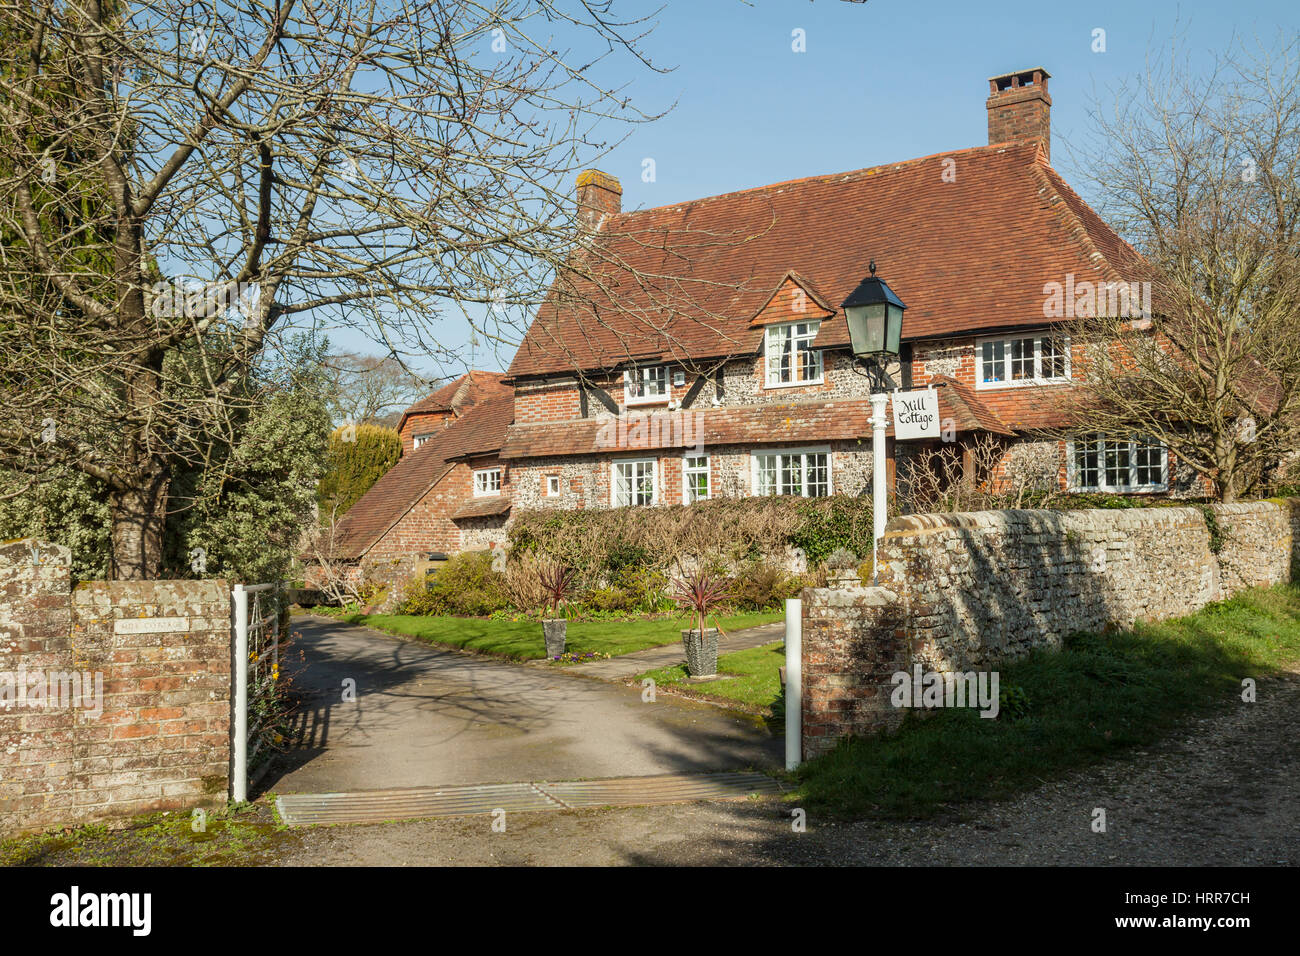 Early spring in Halnaker, West Sussex, England. Stock Photo